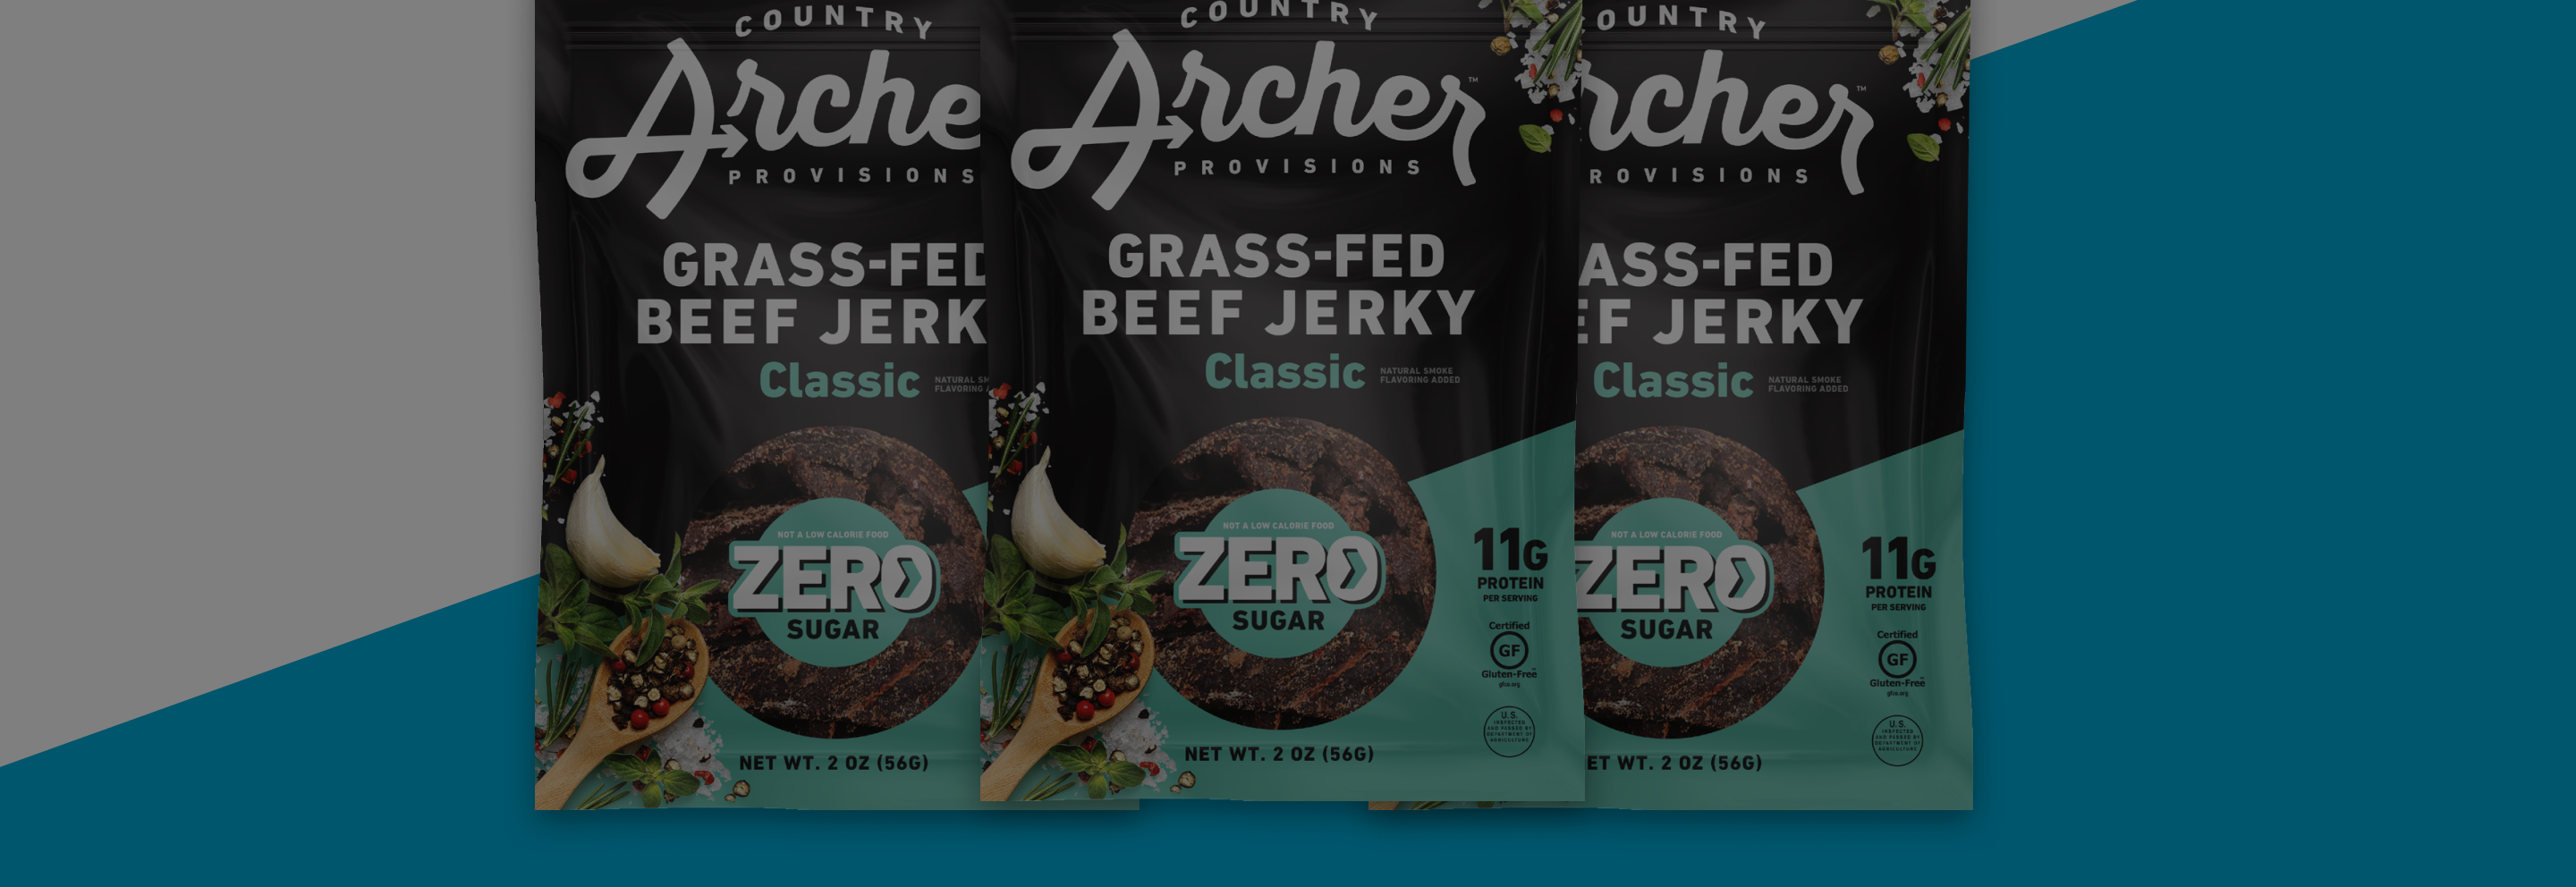 3 Packs of Country Archer Grass-Fed Beef Jerky - Zero